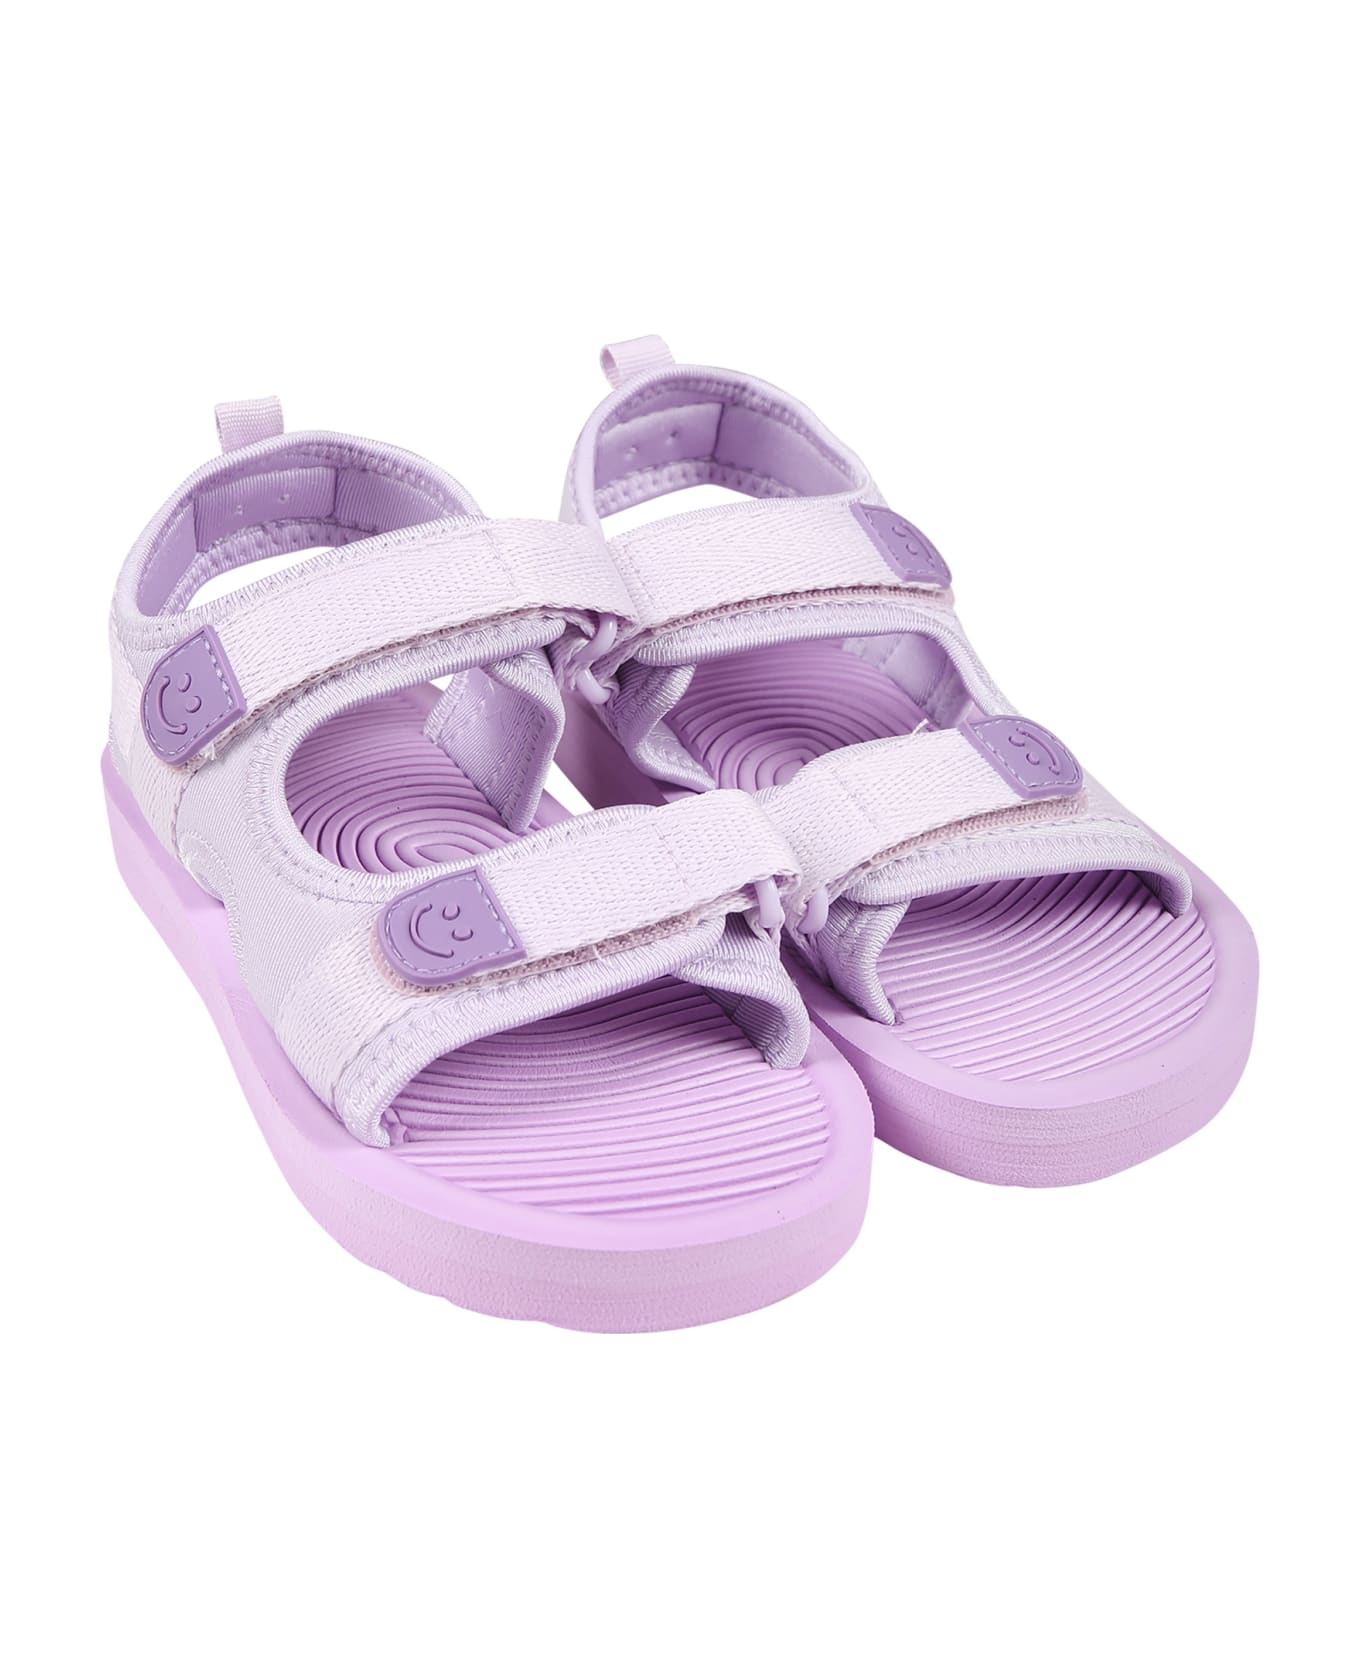 Molo Purple Sandals For Girl With Logo - Violet